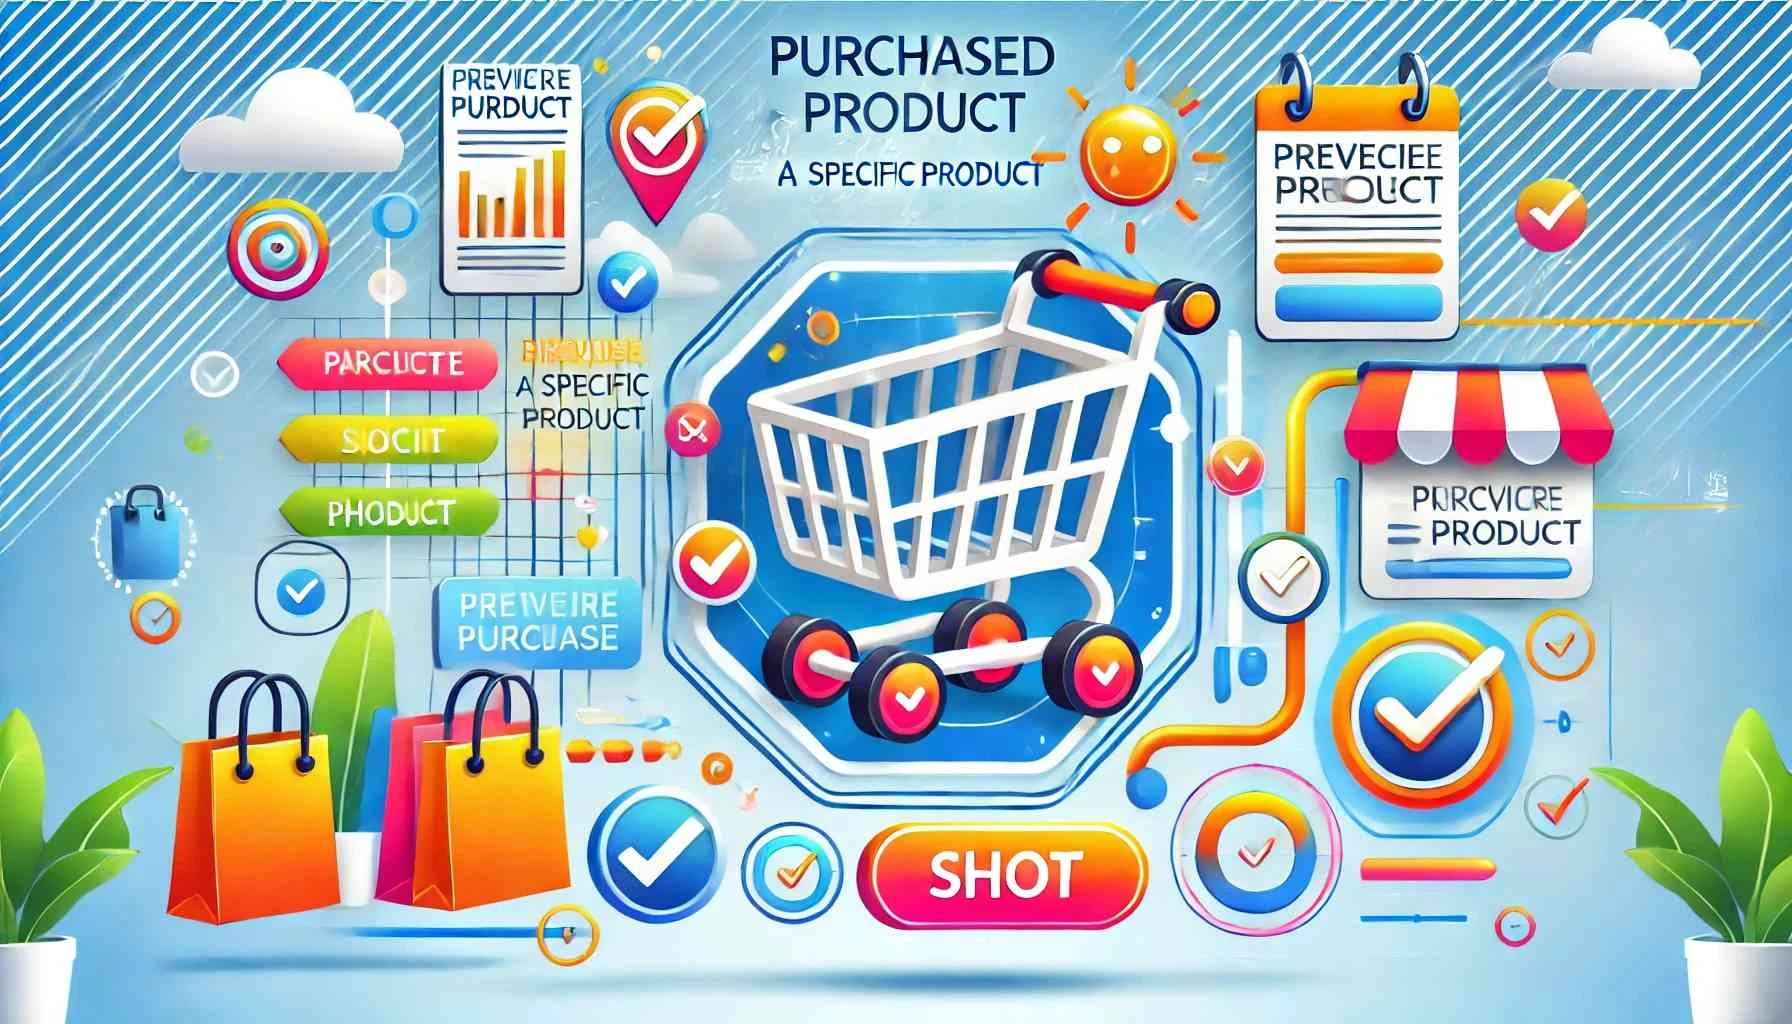 Themed Illustration Depicting The Concept Of Purchased A Specific Product. The Image Should Use Vibrant And Modern 20240714